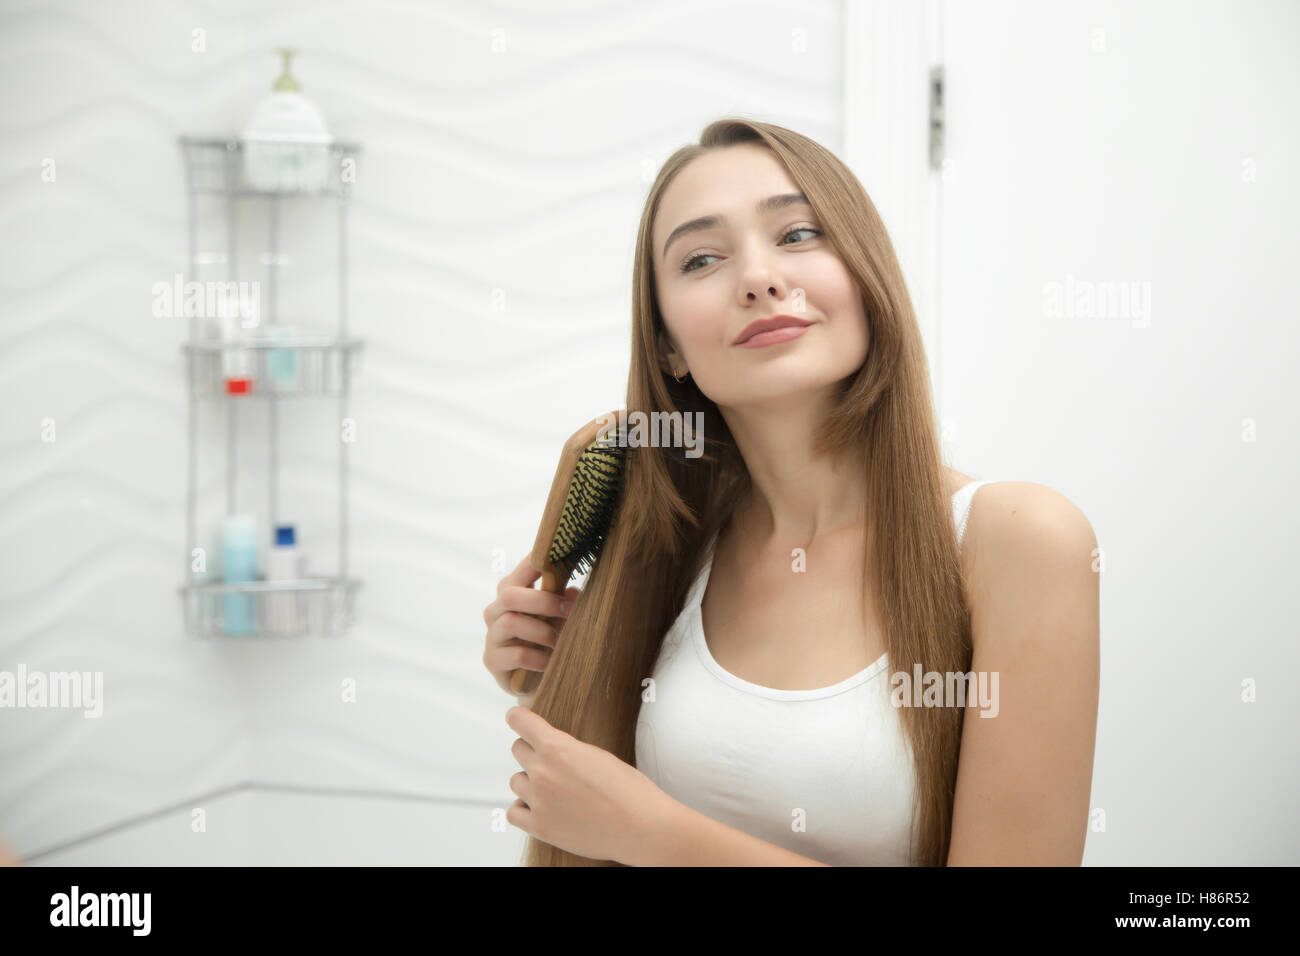 Portrait of a young smiling girl brushing her hair Stock Photo